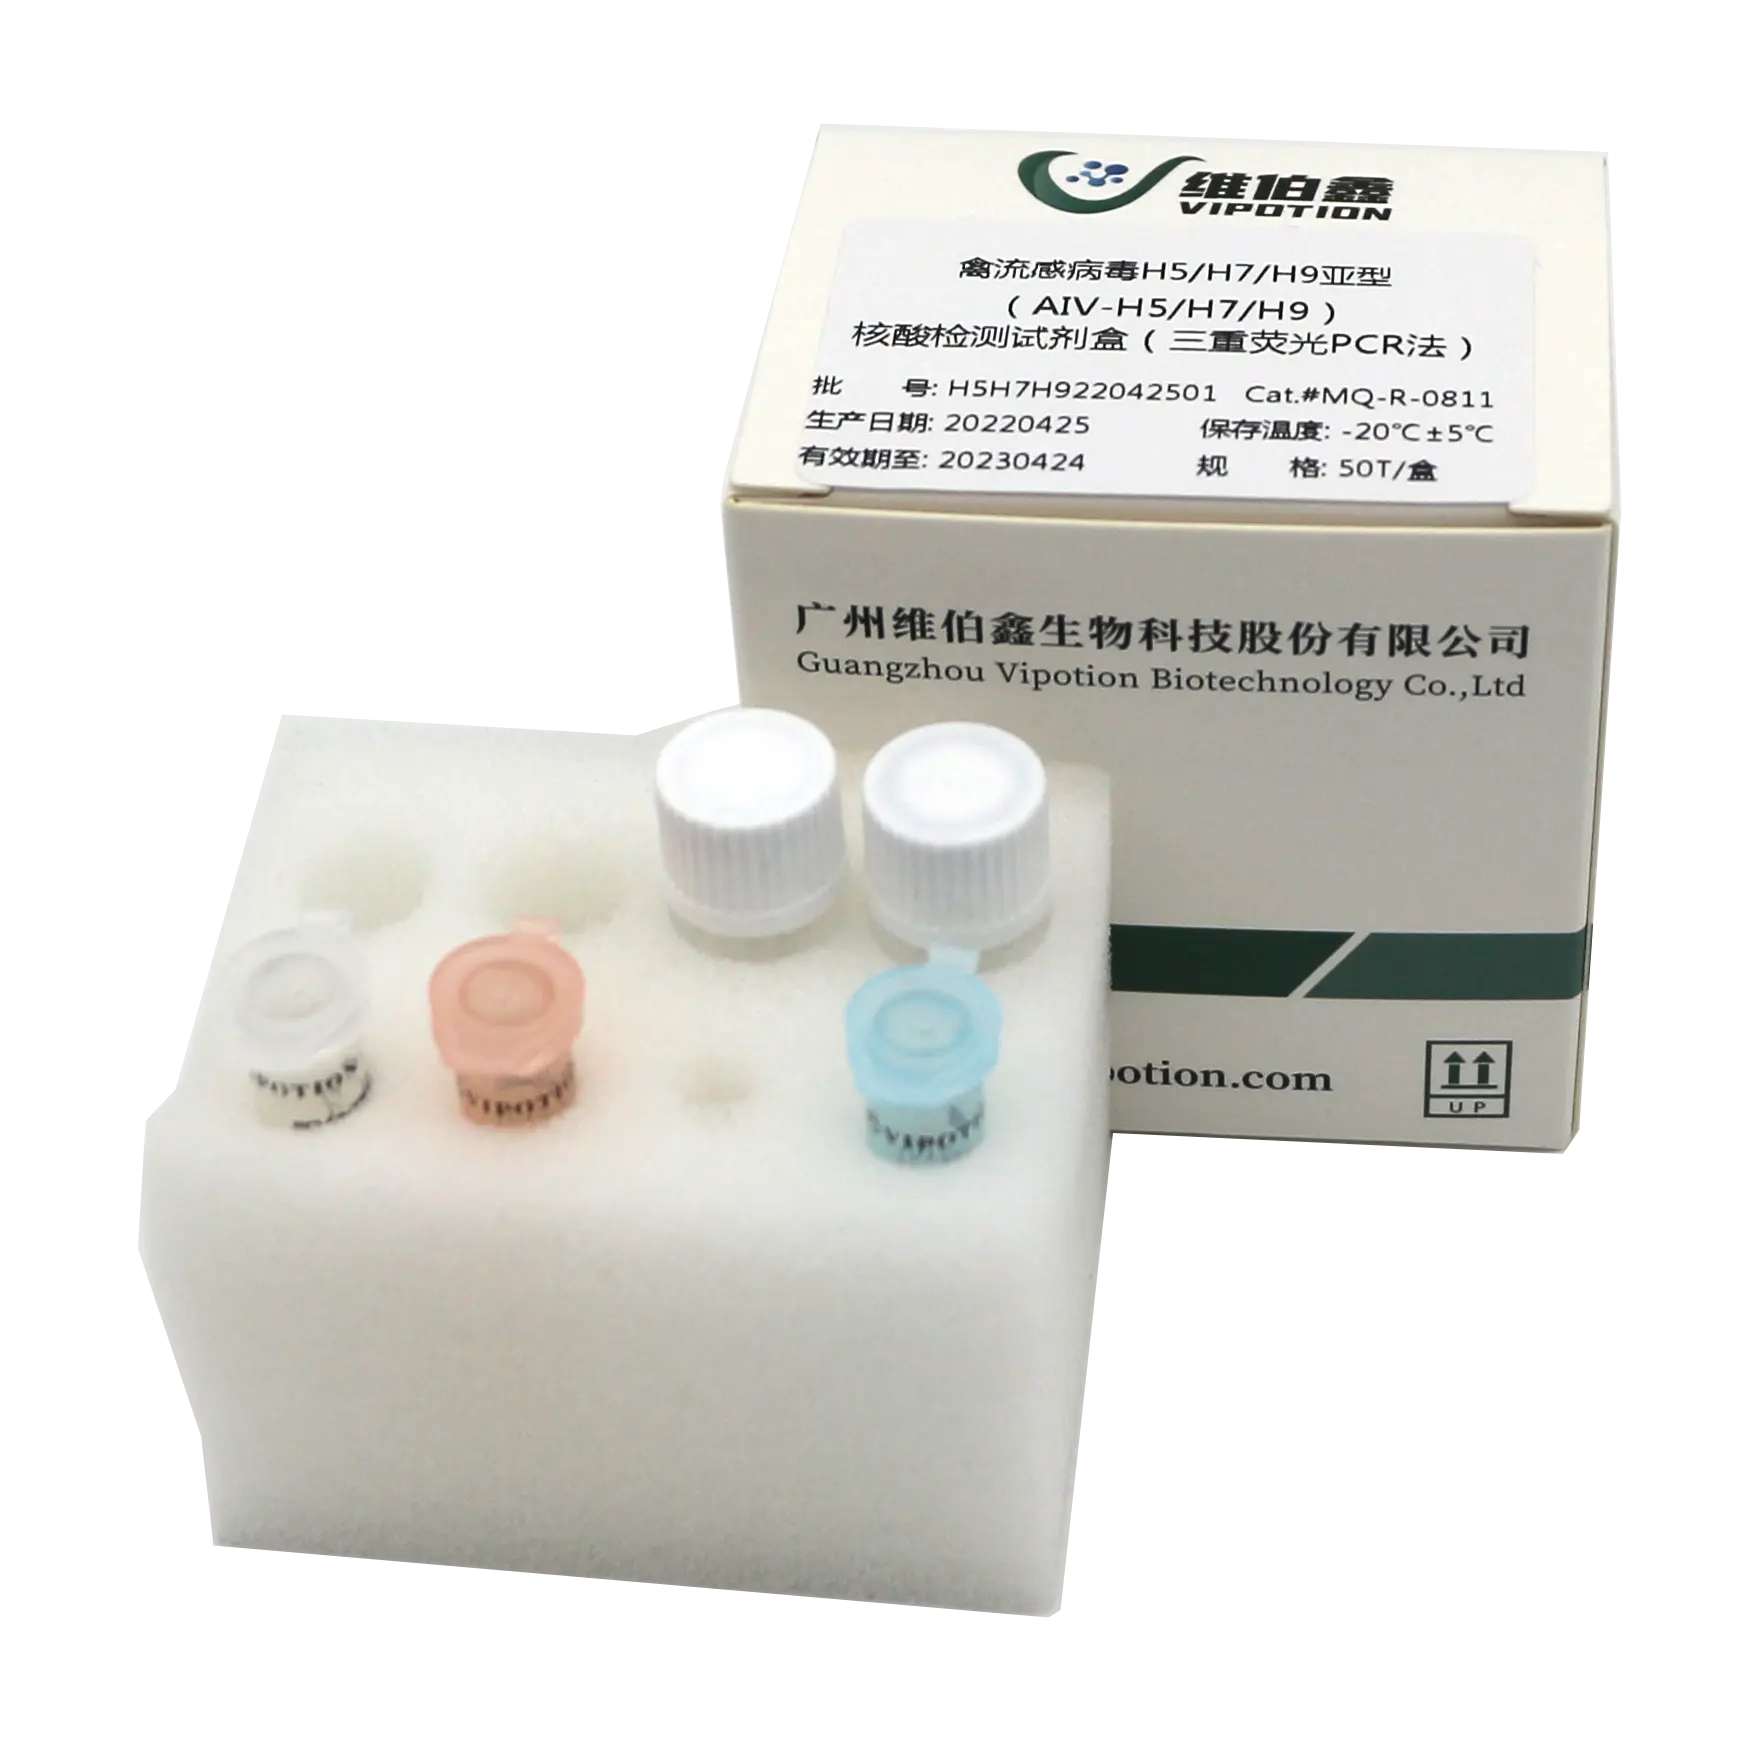 Avian Influenza Virus subtype H5 H7 and H9 Real time PCR poultry qpcr rtpcr kit lyophilized PCR test kit manufacturer